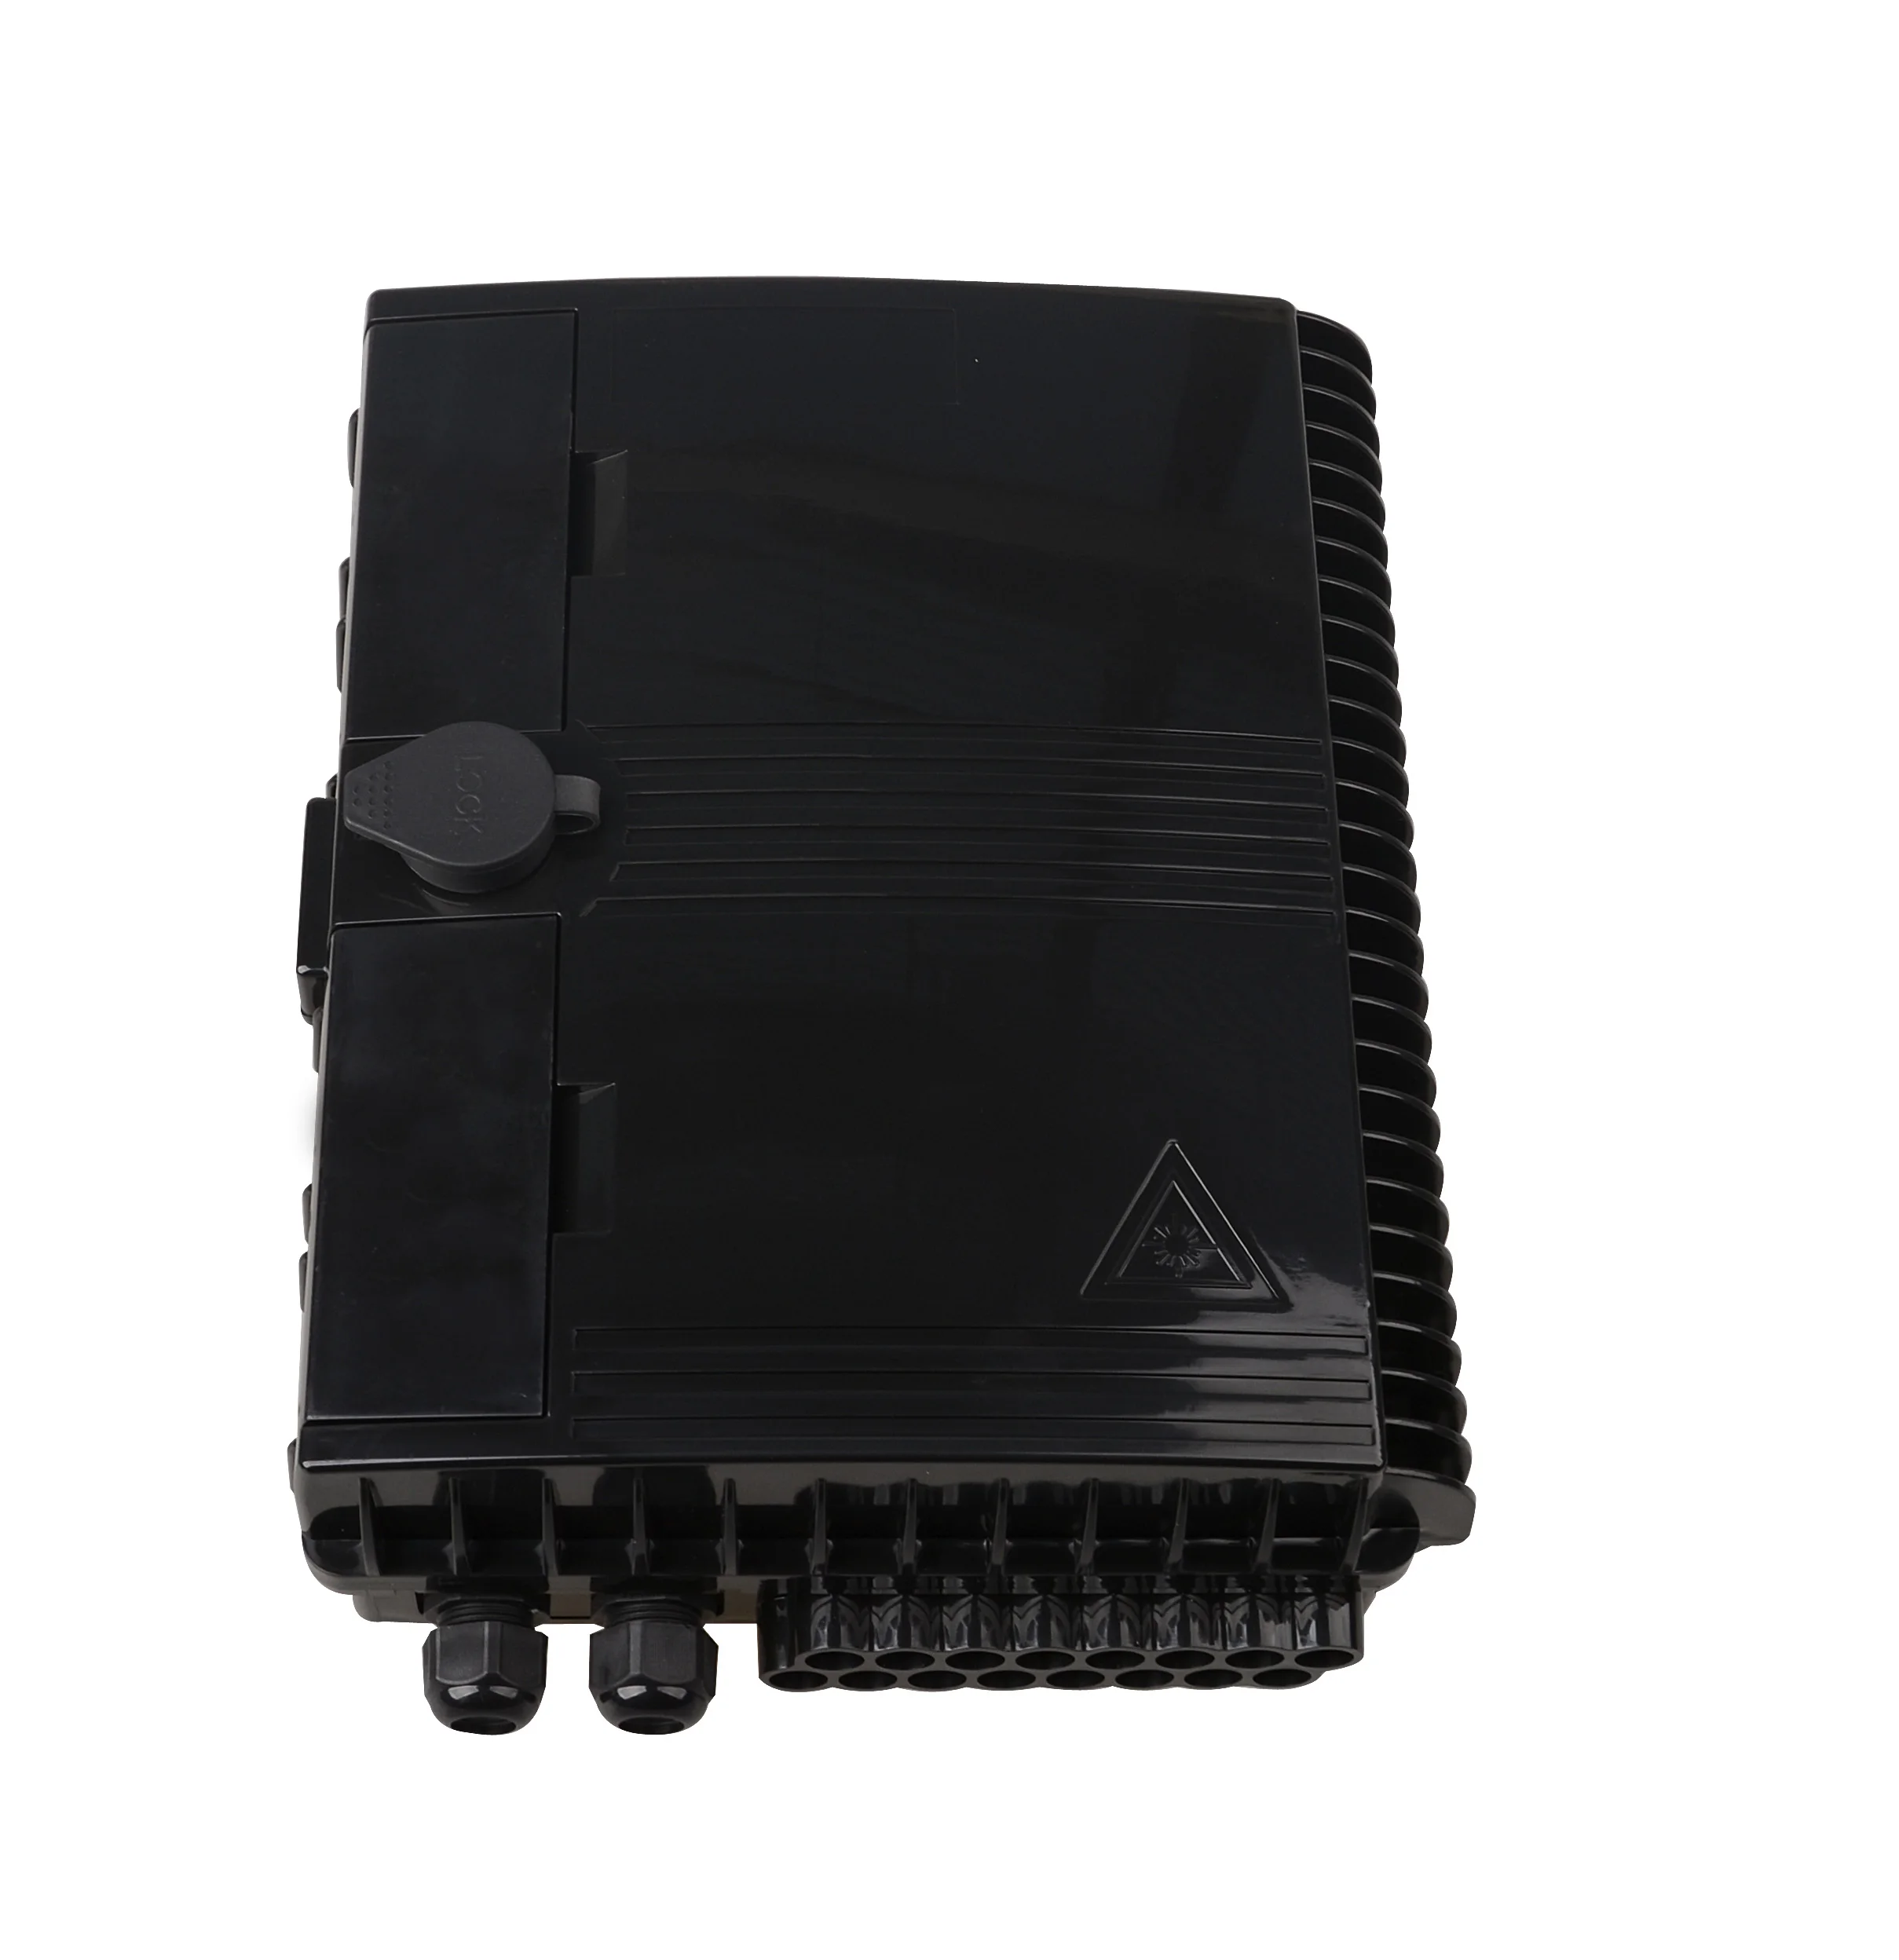 Outdoor Waterproof  Black Color  ABS Type  16 Cores Optical Cable  Distribution Box